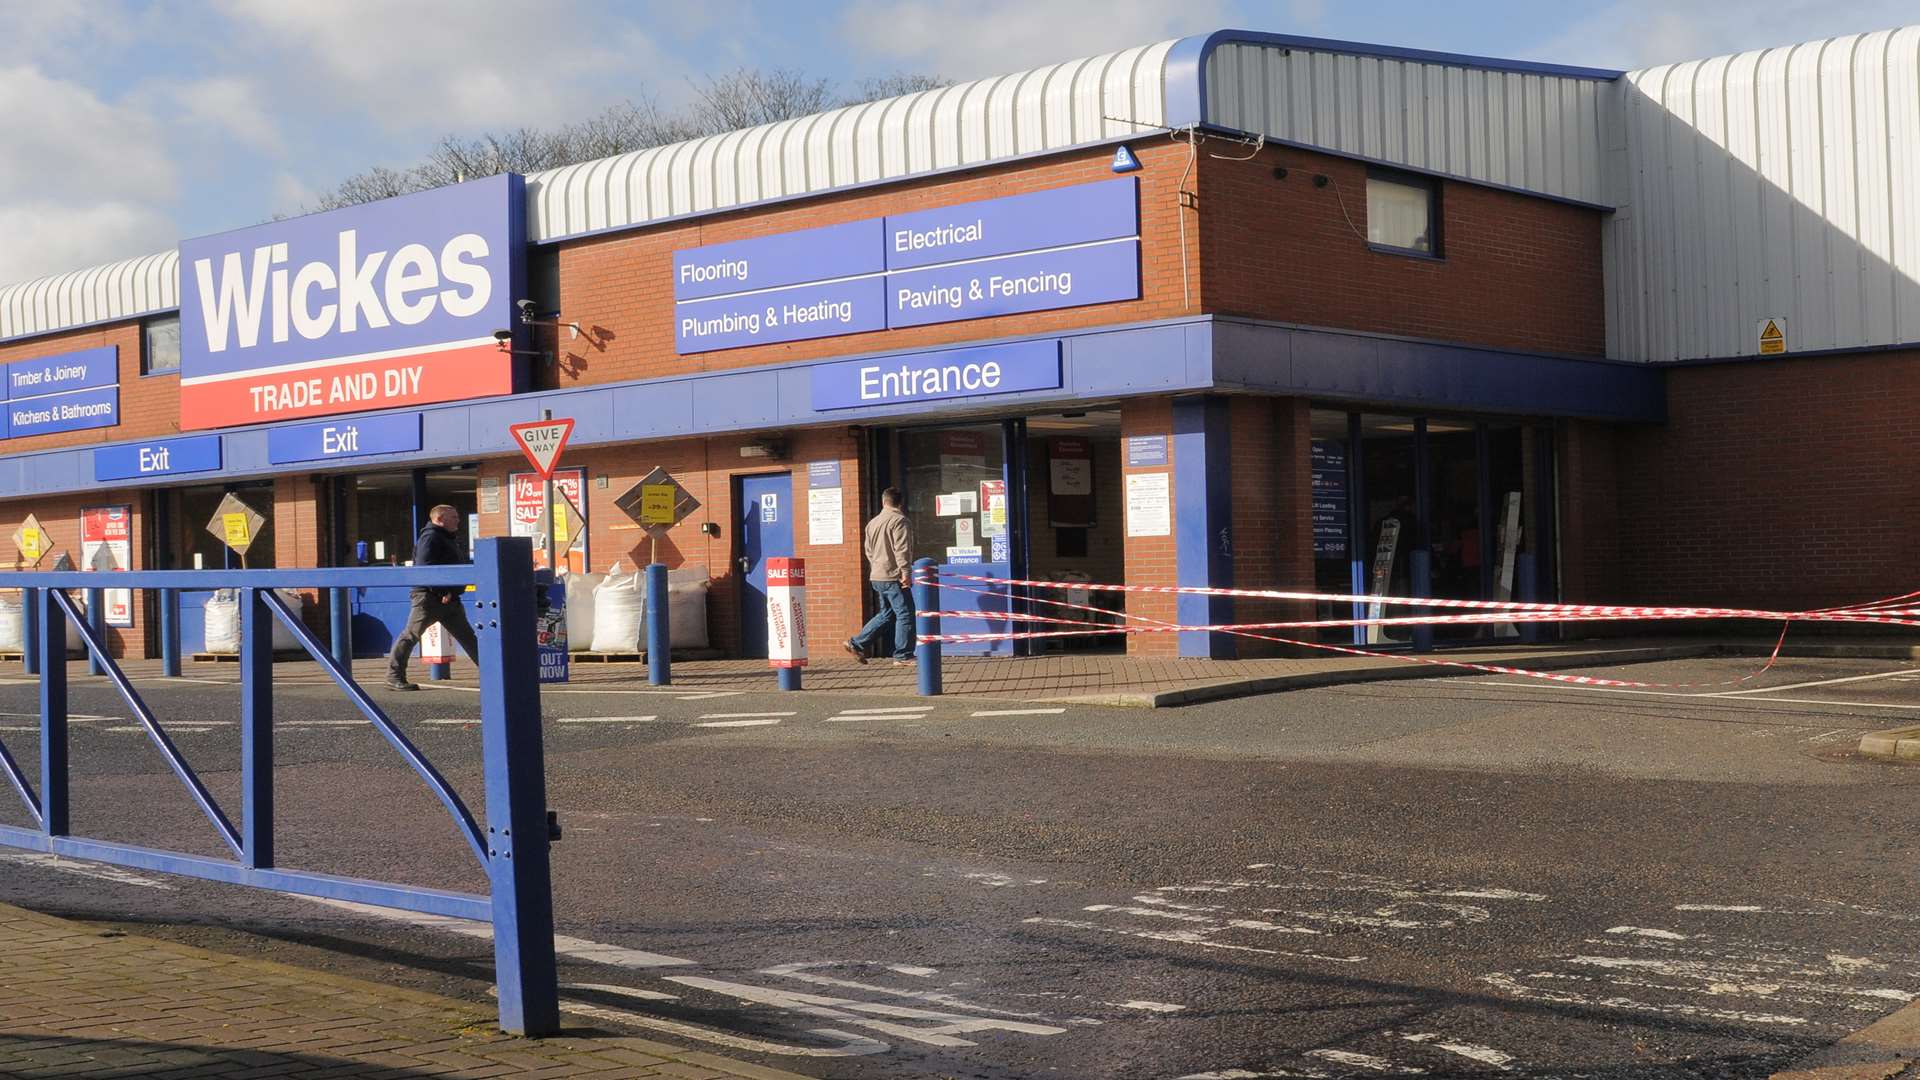 The Wickes store in Chatham